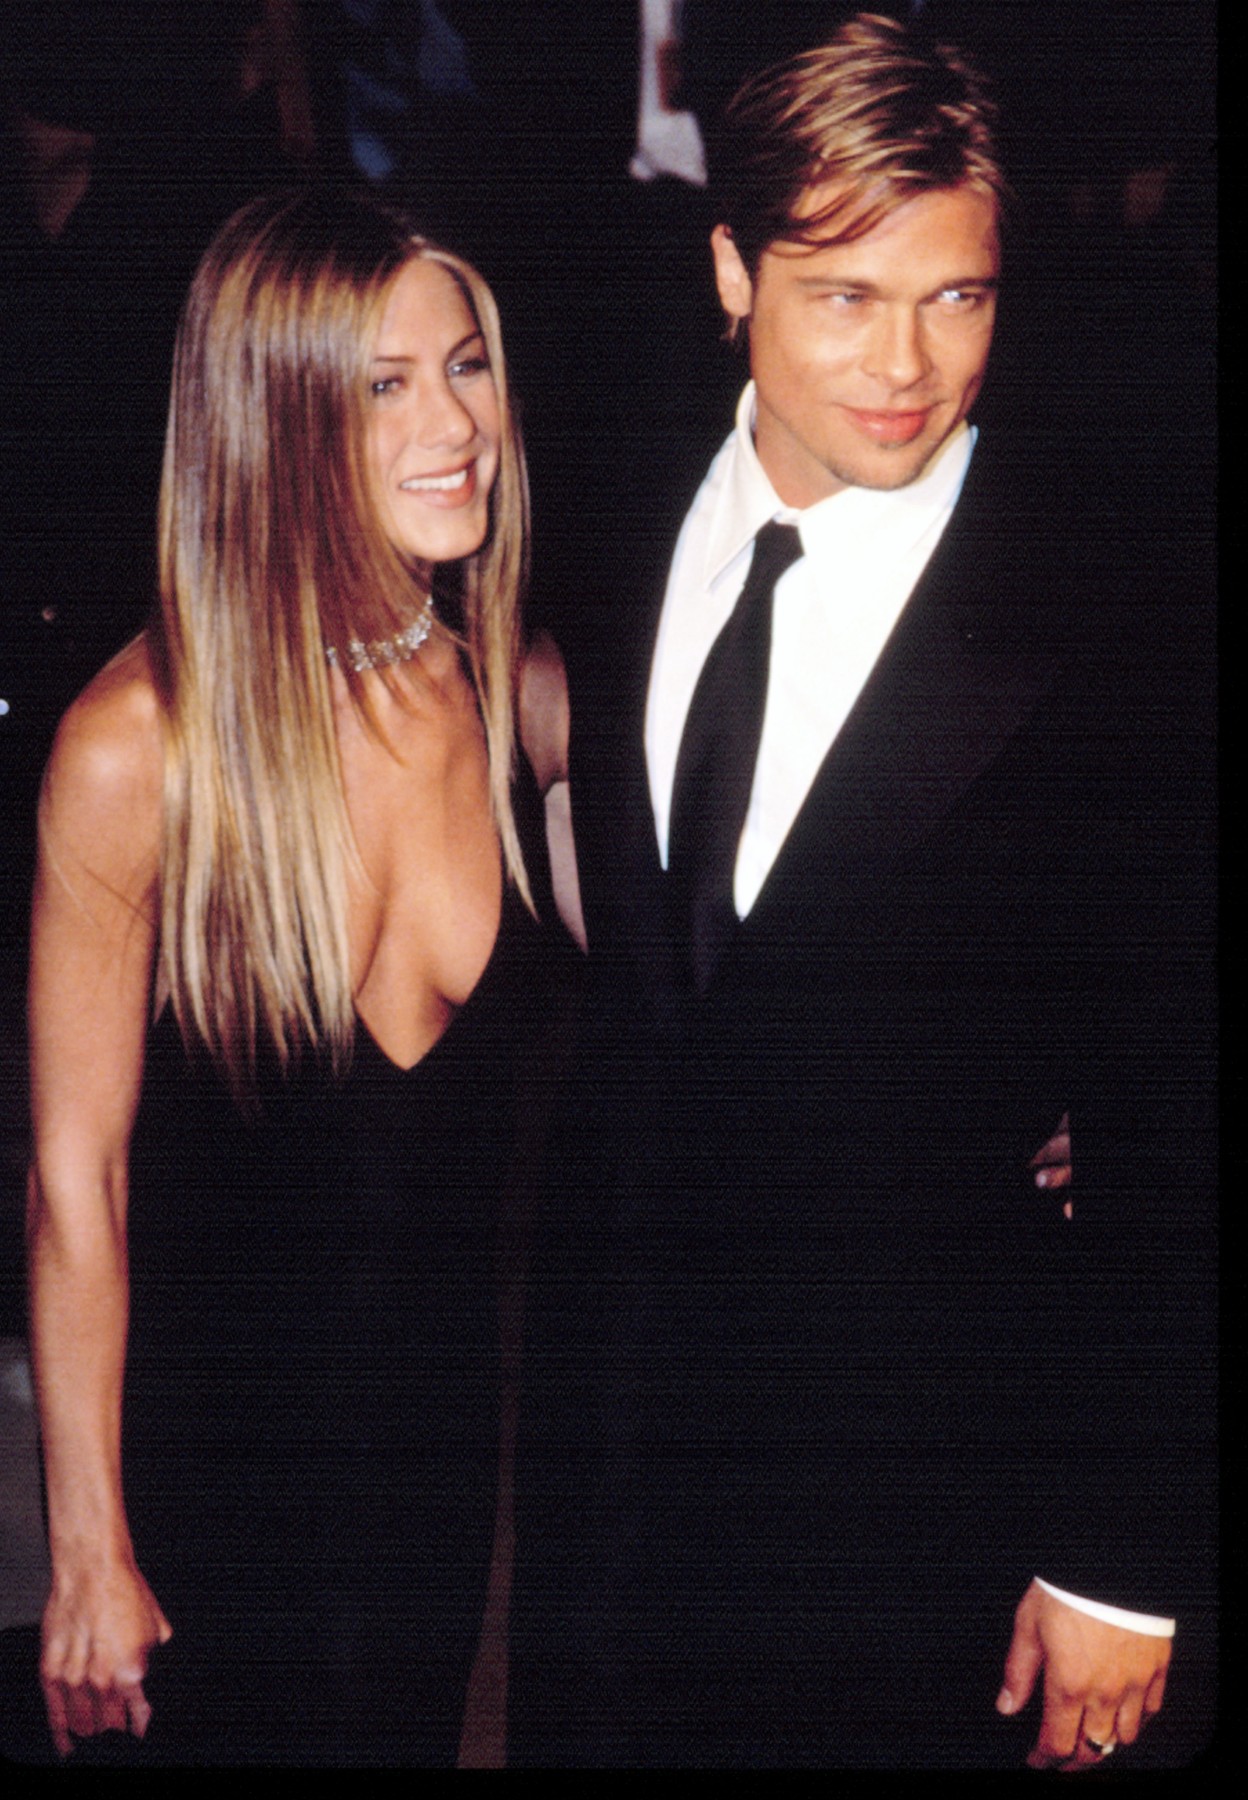 Jennifer Aniston and Brad Pitt, attend the Vanity Fair Party, after the Academy Awards, 3/26/2000.,Image: 98313040, License: Rights-managed, Restrictions: For usage credit please use; Robert Bertoia/Everett Collection, Model Release: no, Credit line: Robert Bertoia Collection / Everett / Profimedia